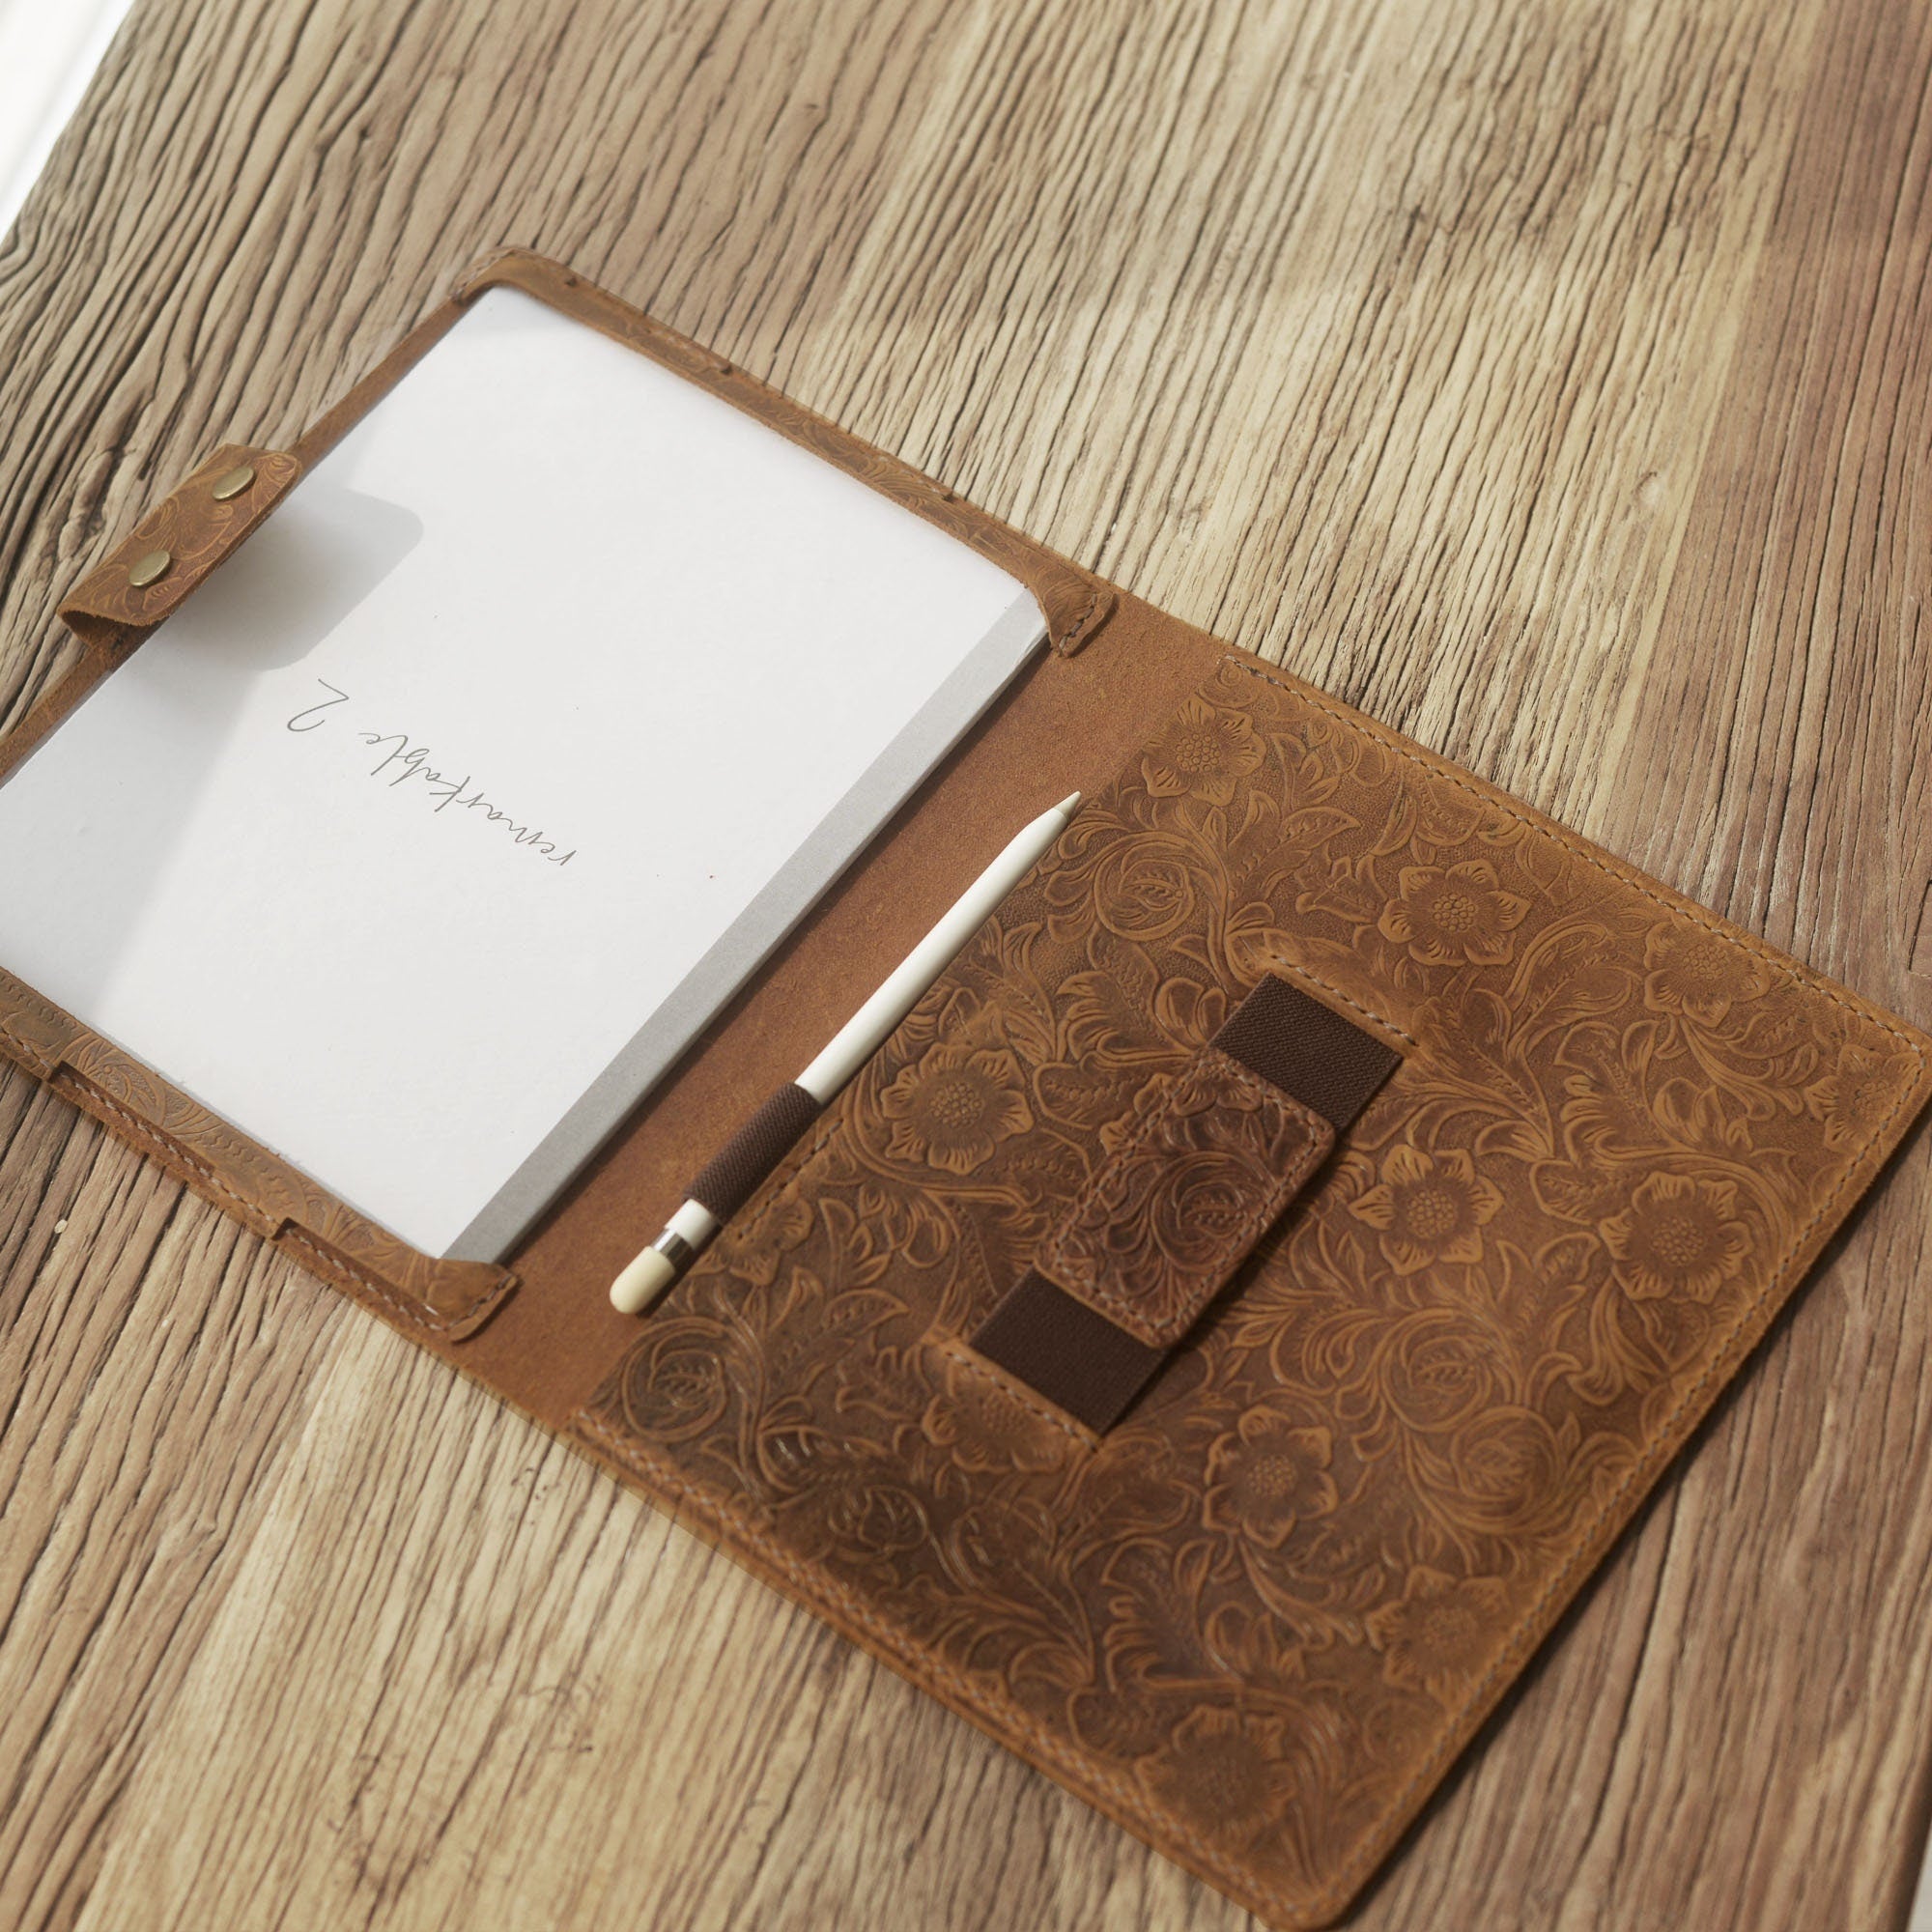 Tooled leather remarkable 2 tablet case – DMleather